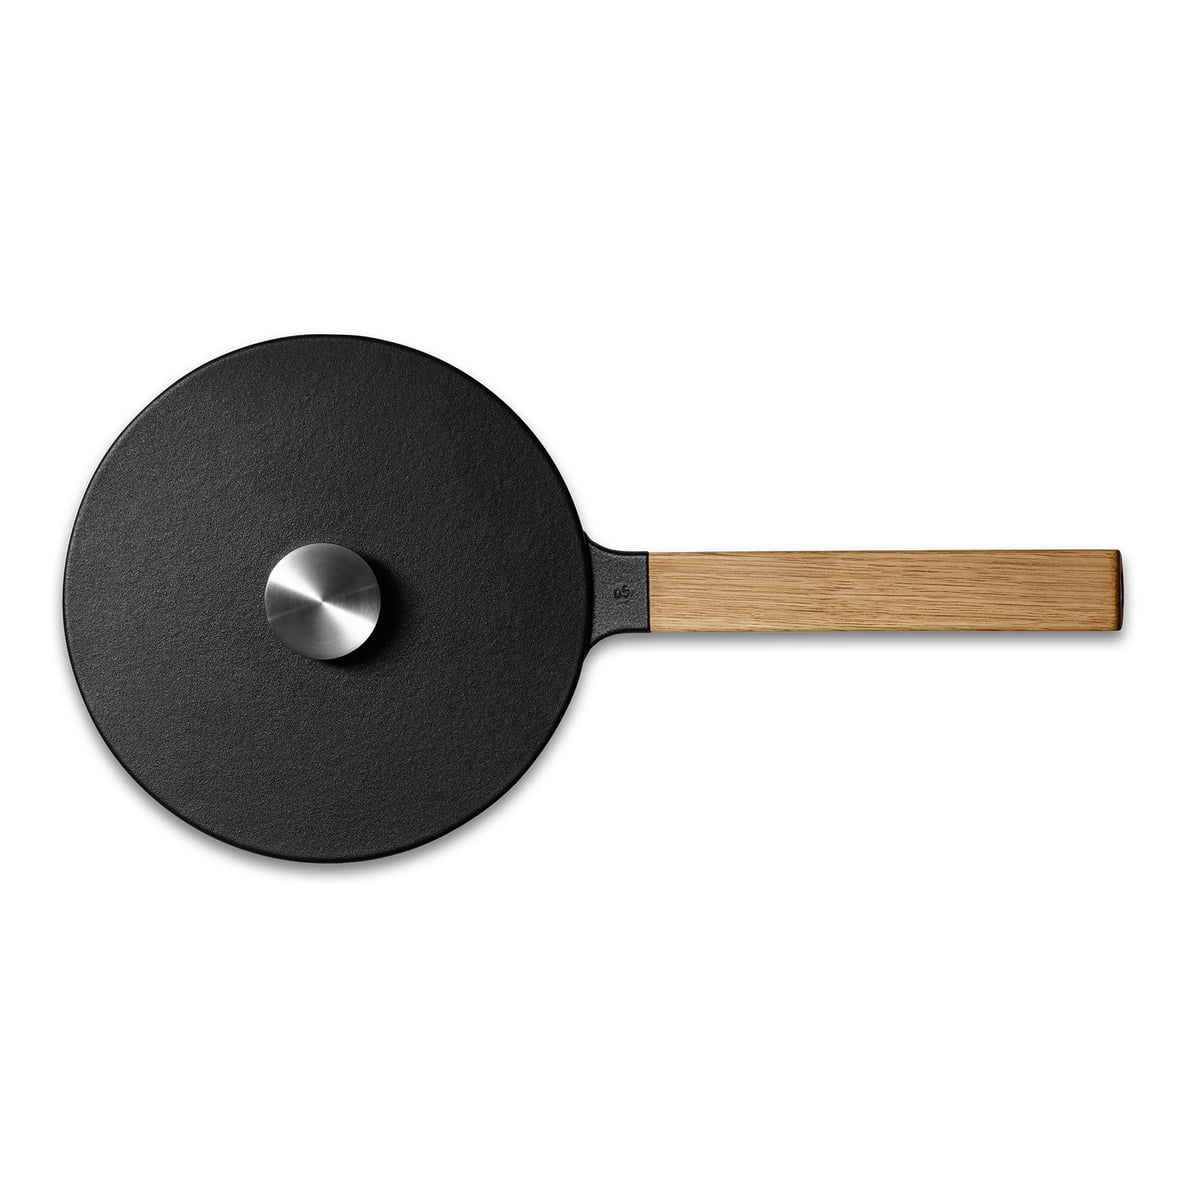 Saucepan with Lid and Wooden Handle by Morsø